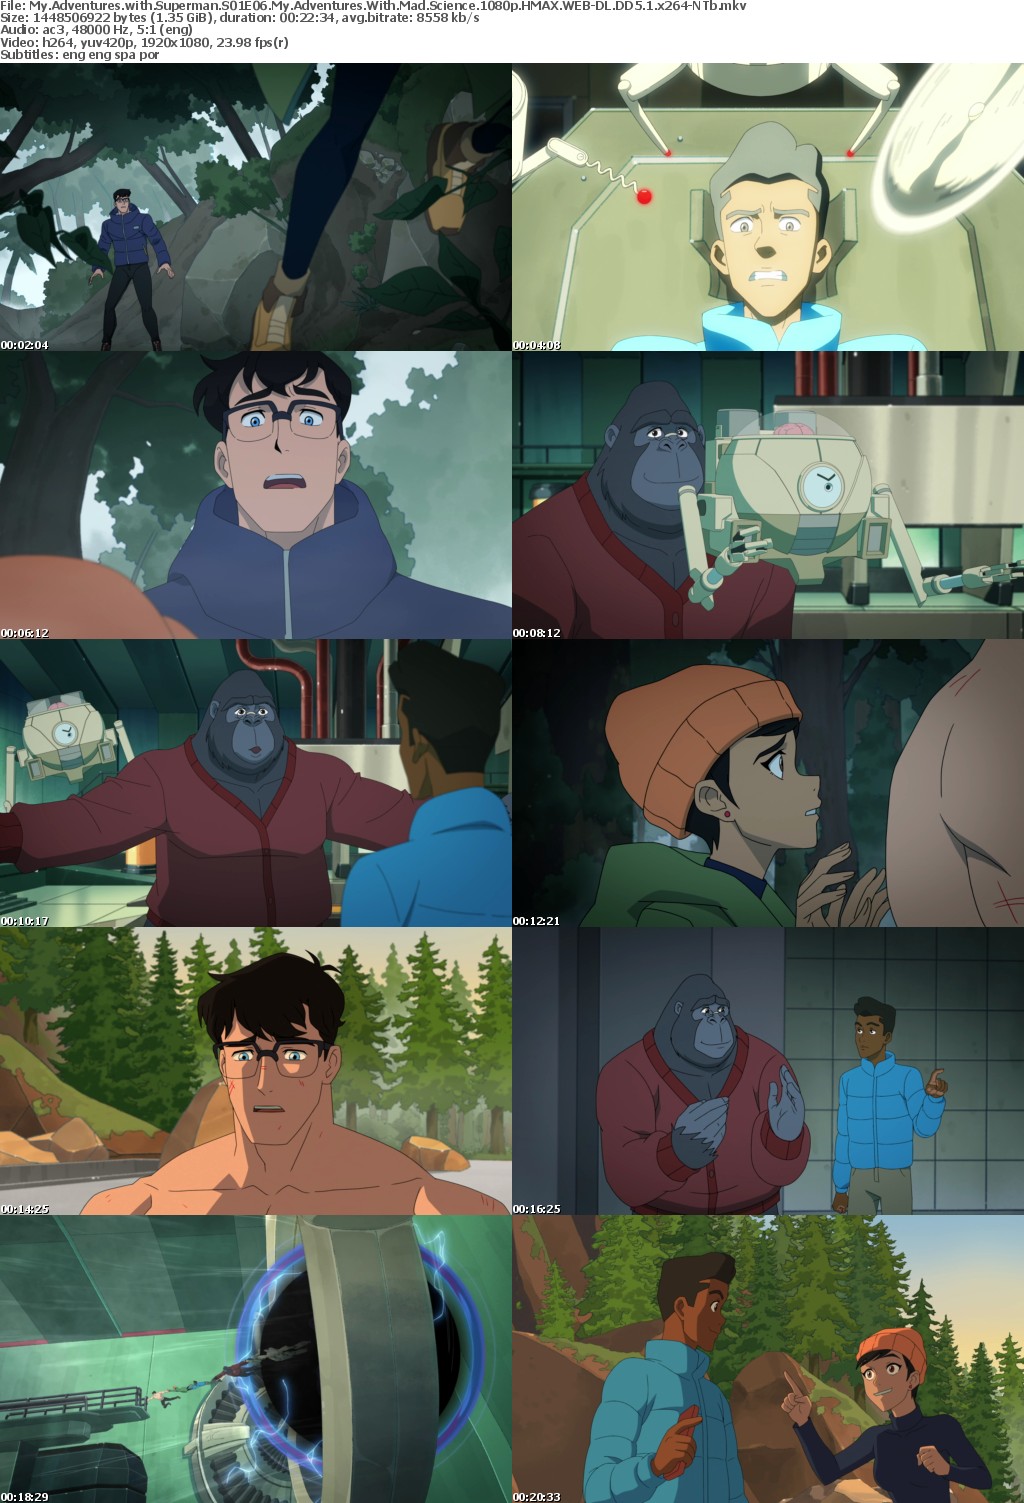 My Adventures with Superman S01E06 My Adventures With Mad Science 1080p HMAX WEB-DL DD5 1 x264-NTb